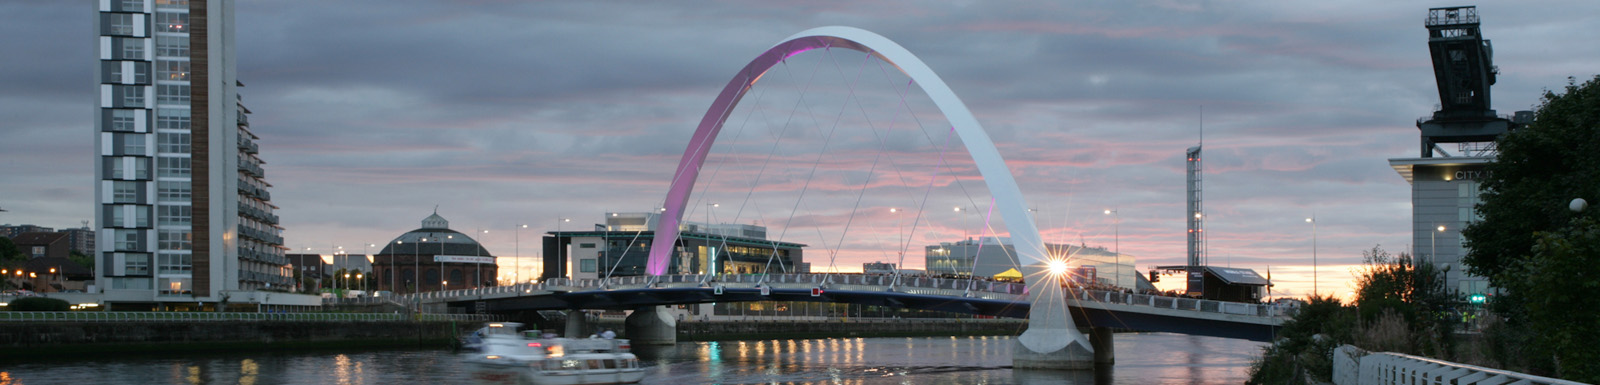 The opening of the Clyde Arc bridge